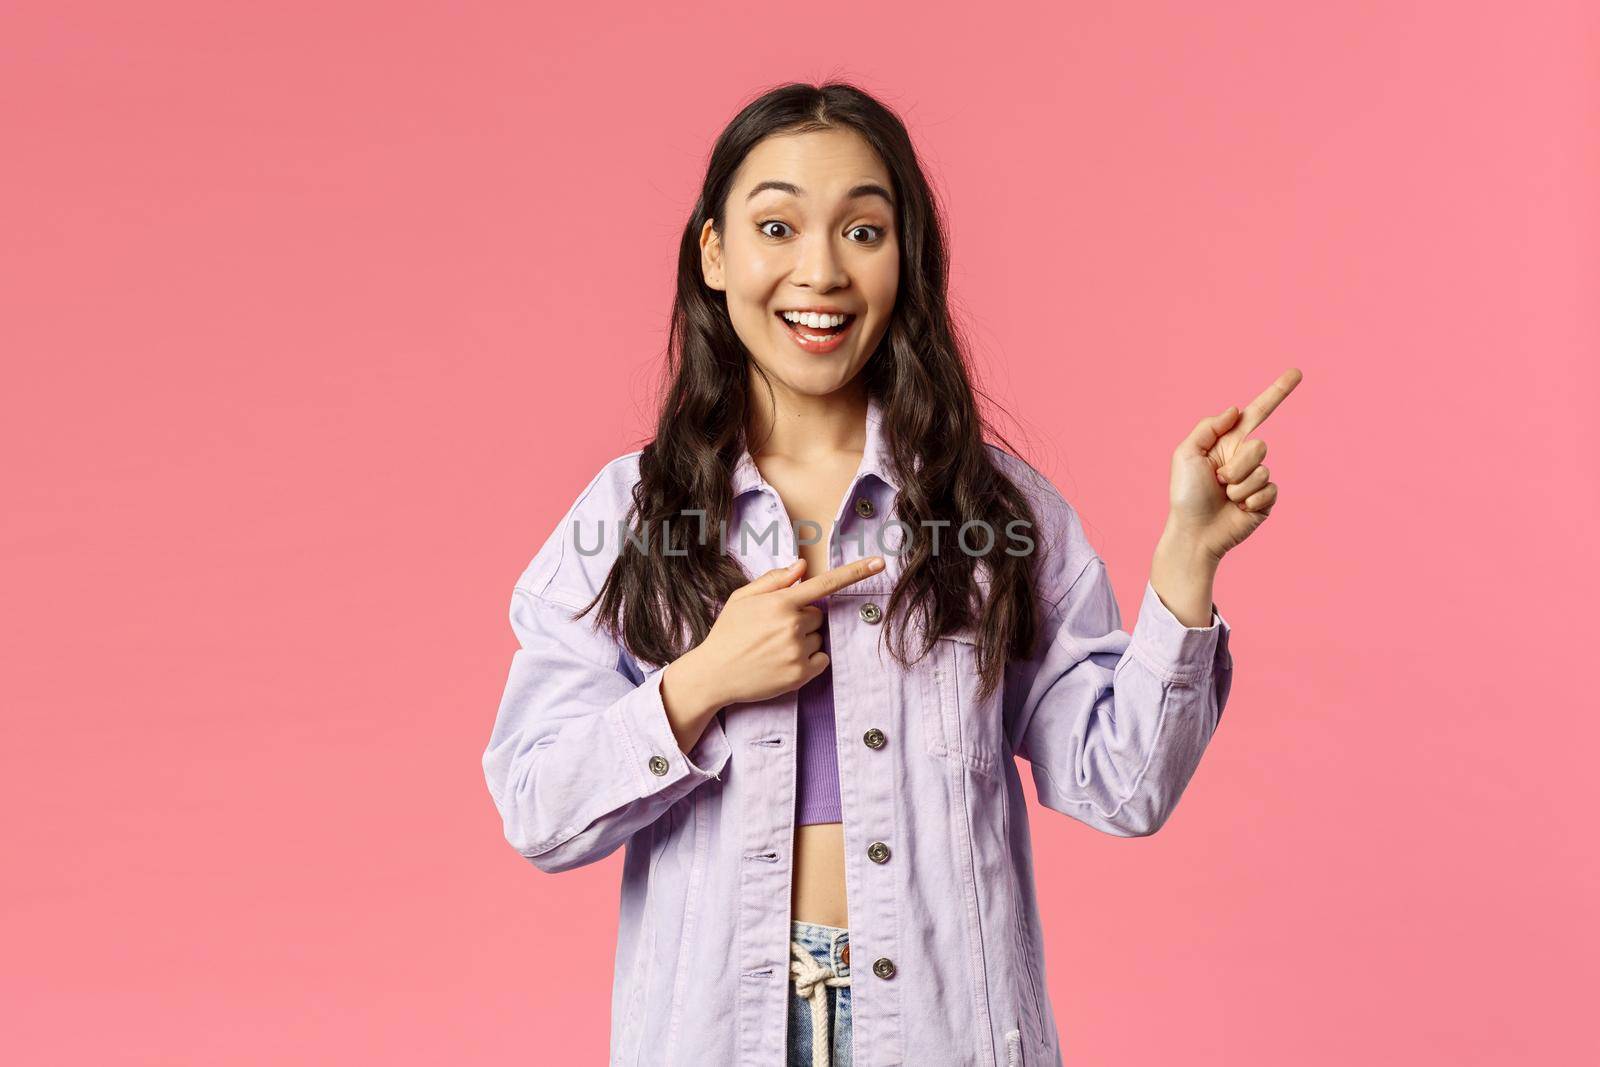 Portrait of enthusiastic young girl found excellent online courses to subscribe during quarantine, pointing fingers right asking friend join together, smiling amused, pink background by Benzoix